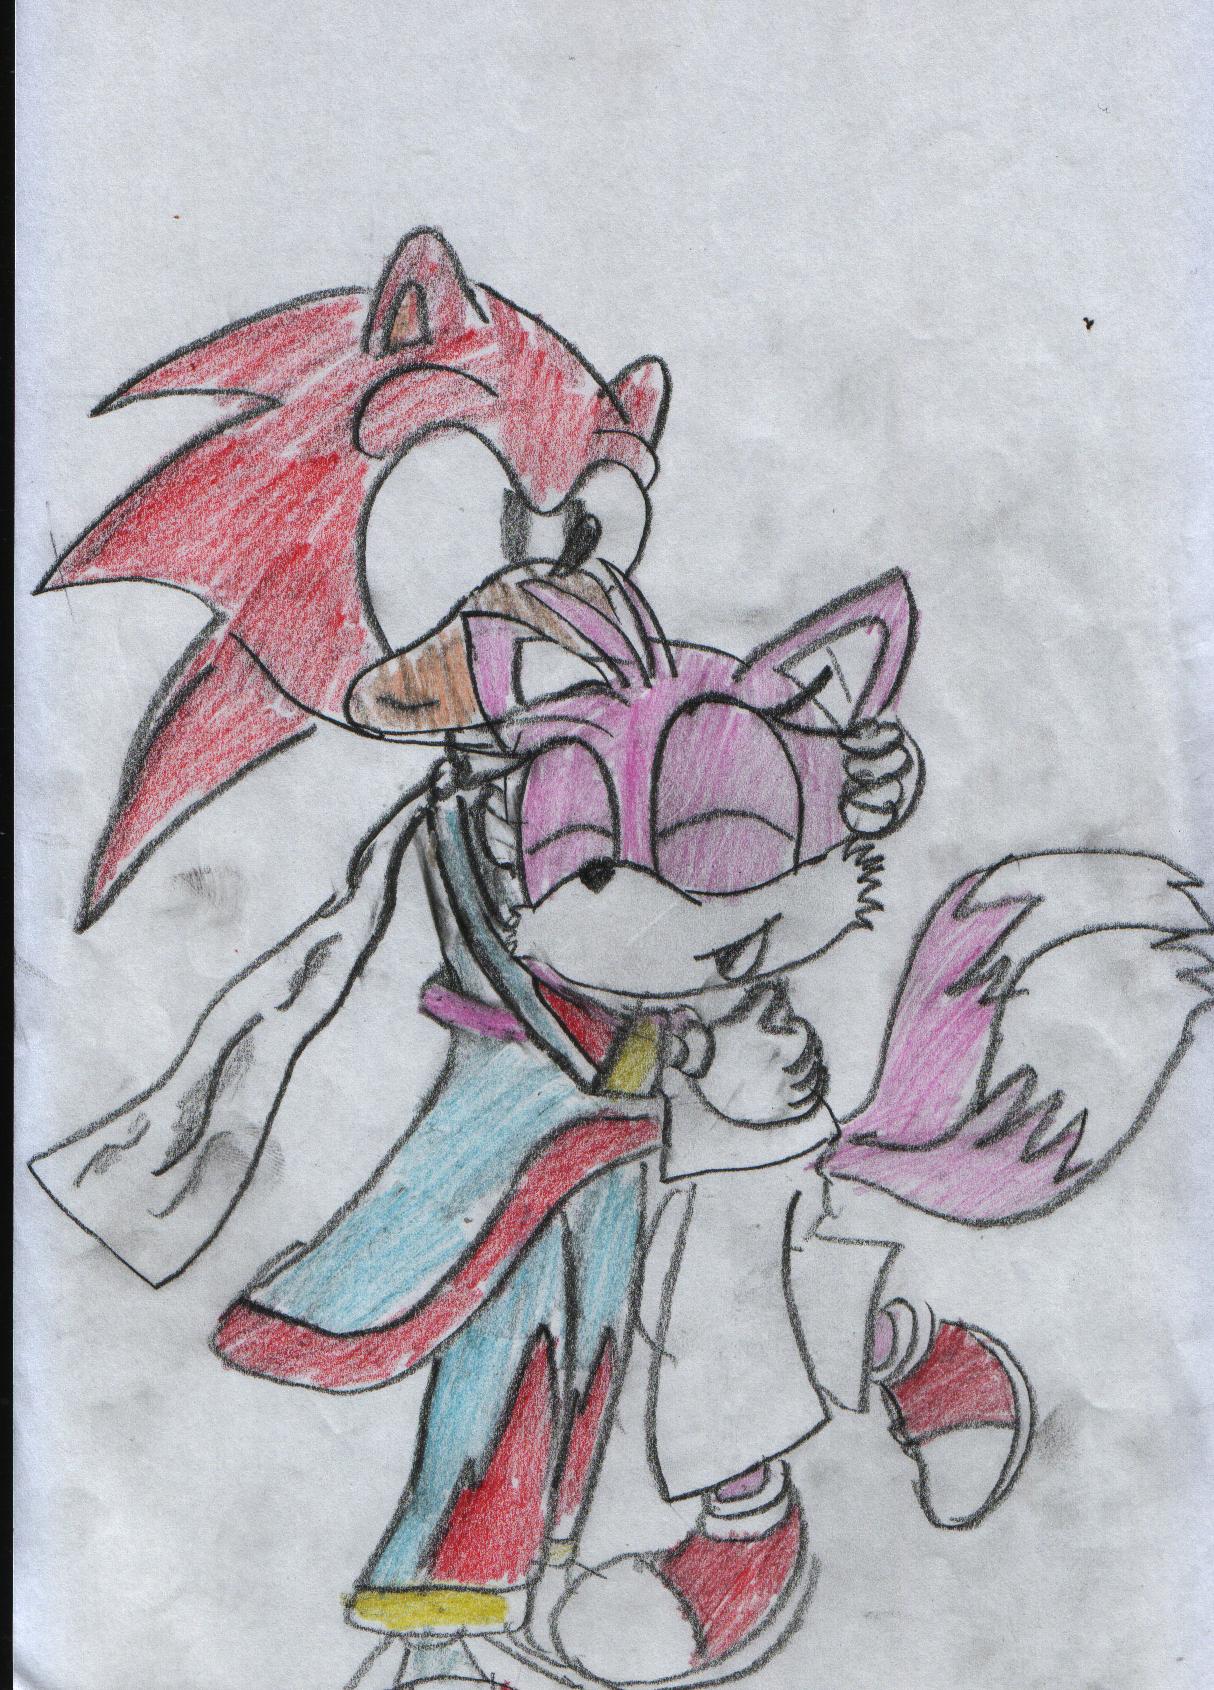 jordan and taila(request from sonicdx1995) by jordanthehedgehog